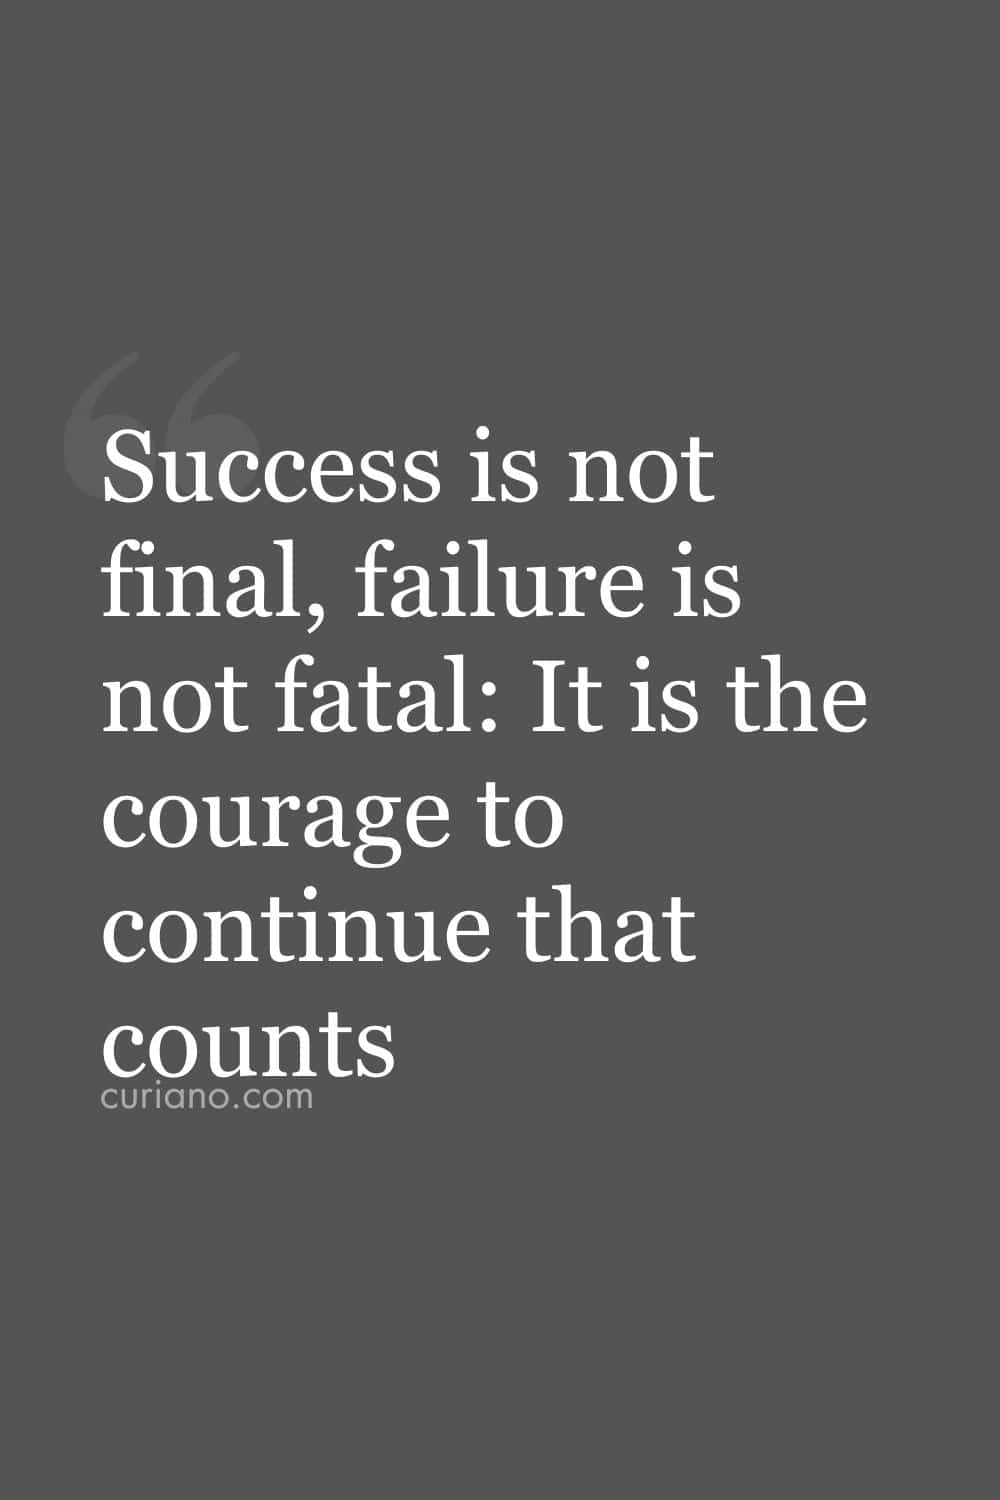 Success is not final, failure is not fatal: It is the courage to continue that counts